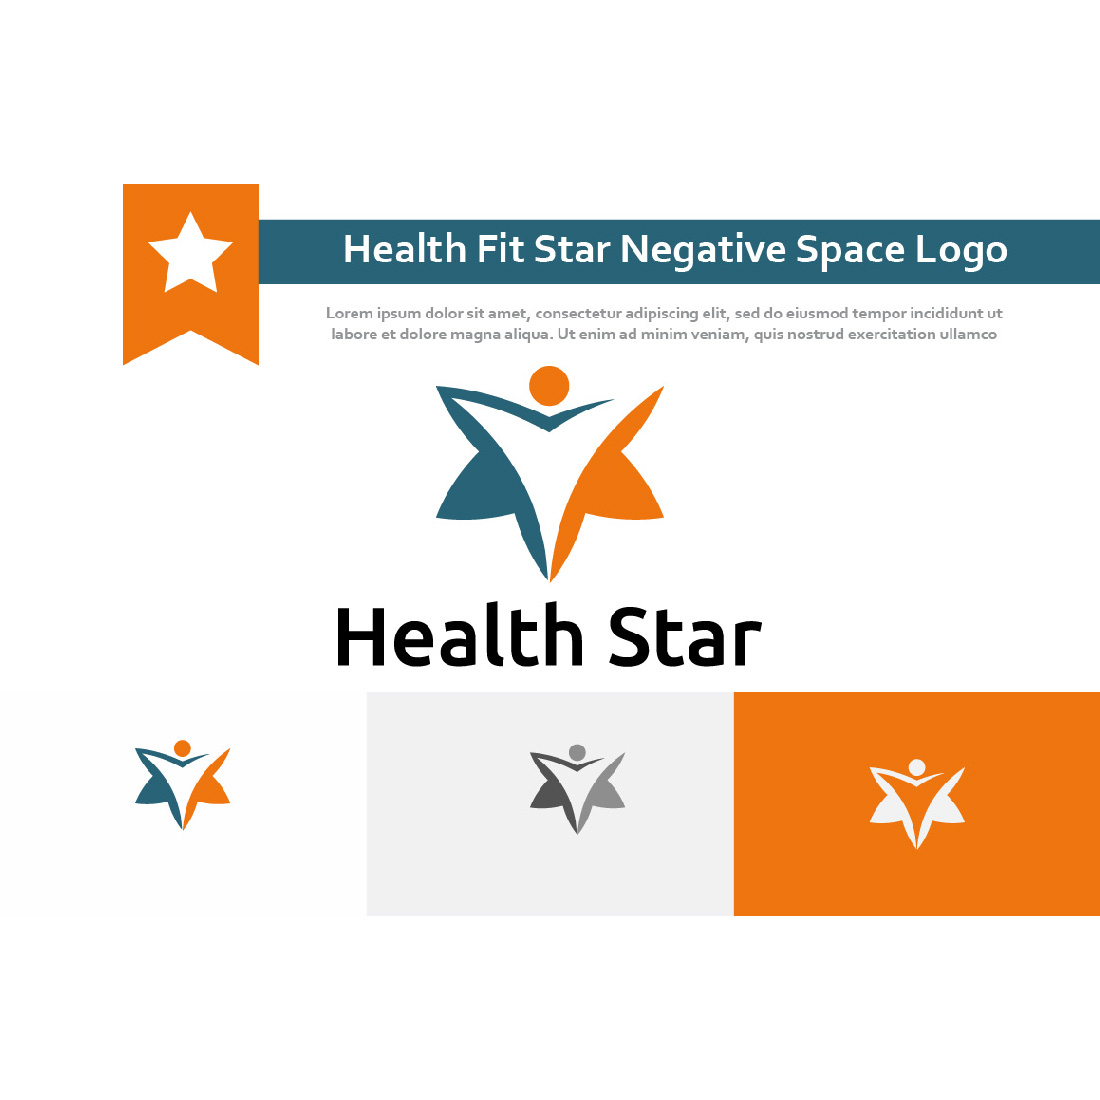 Health Fit Star Negative Space Abstract People Logo Example.